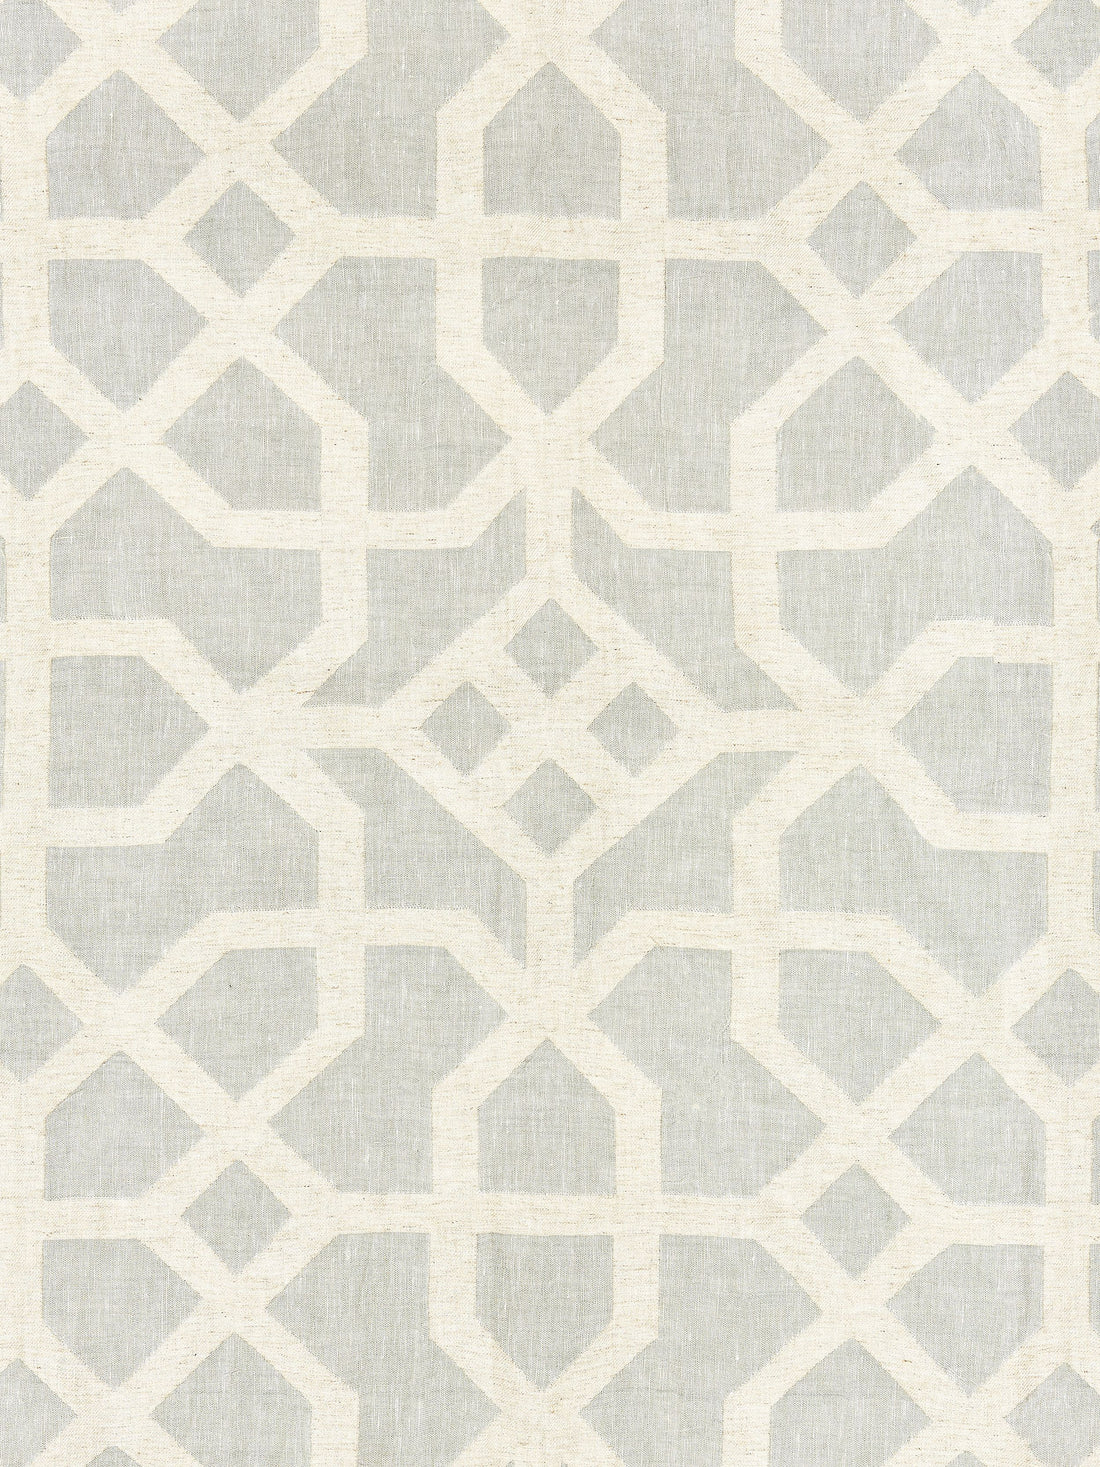 Linen Lattice fabric in mineral and greige color - pattern number SC 000227149 - by Scalamandre in the Scalamandre Fabrics Book 1 collection